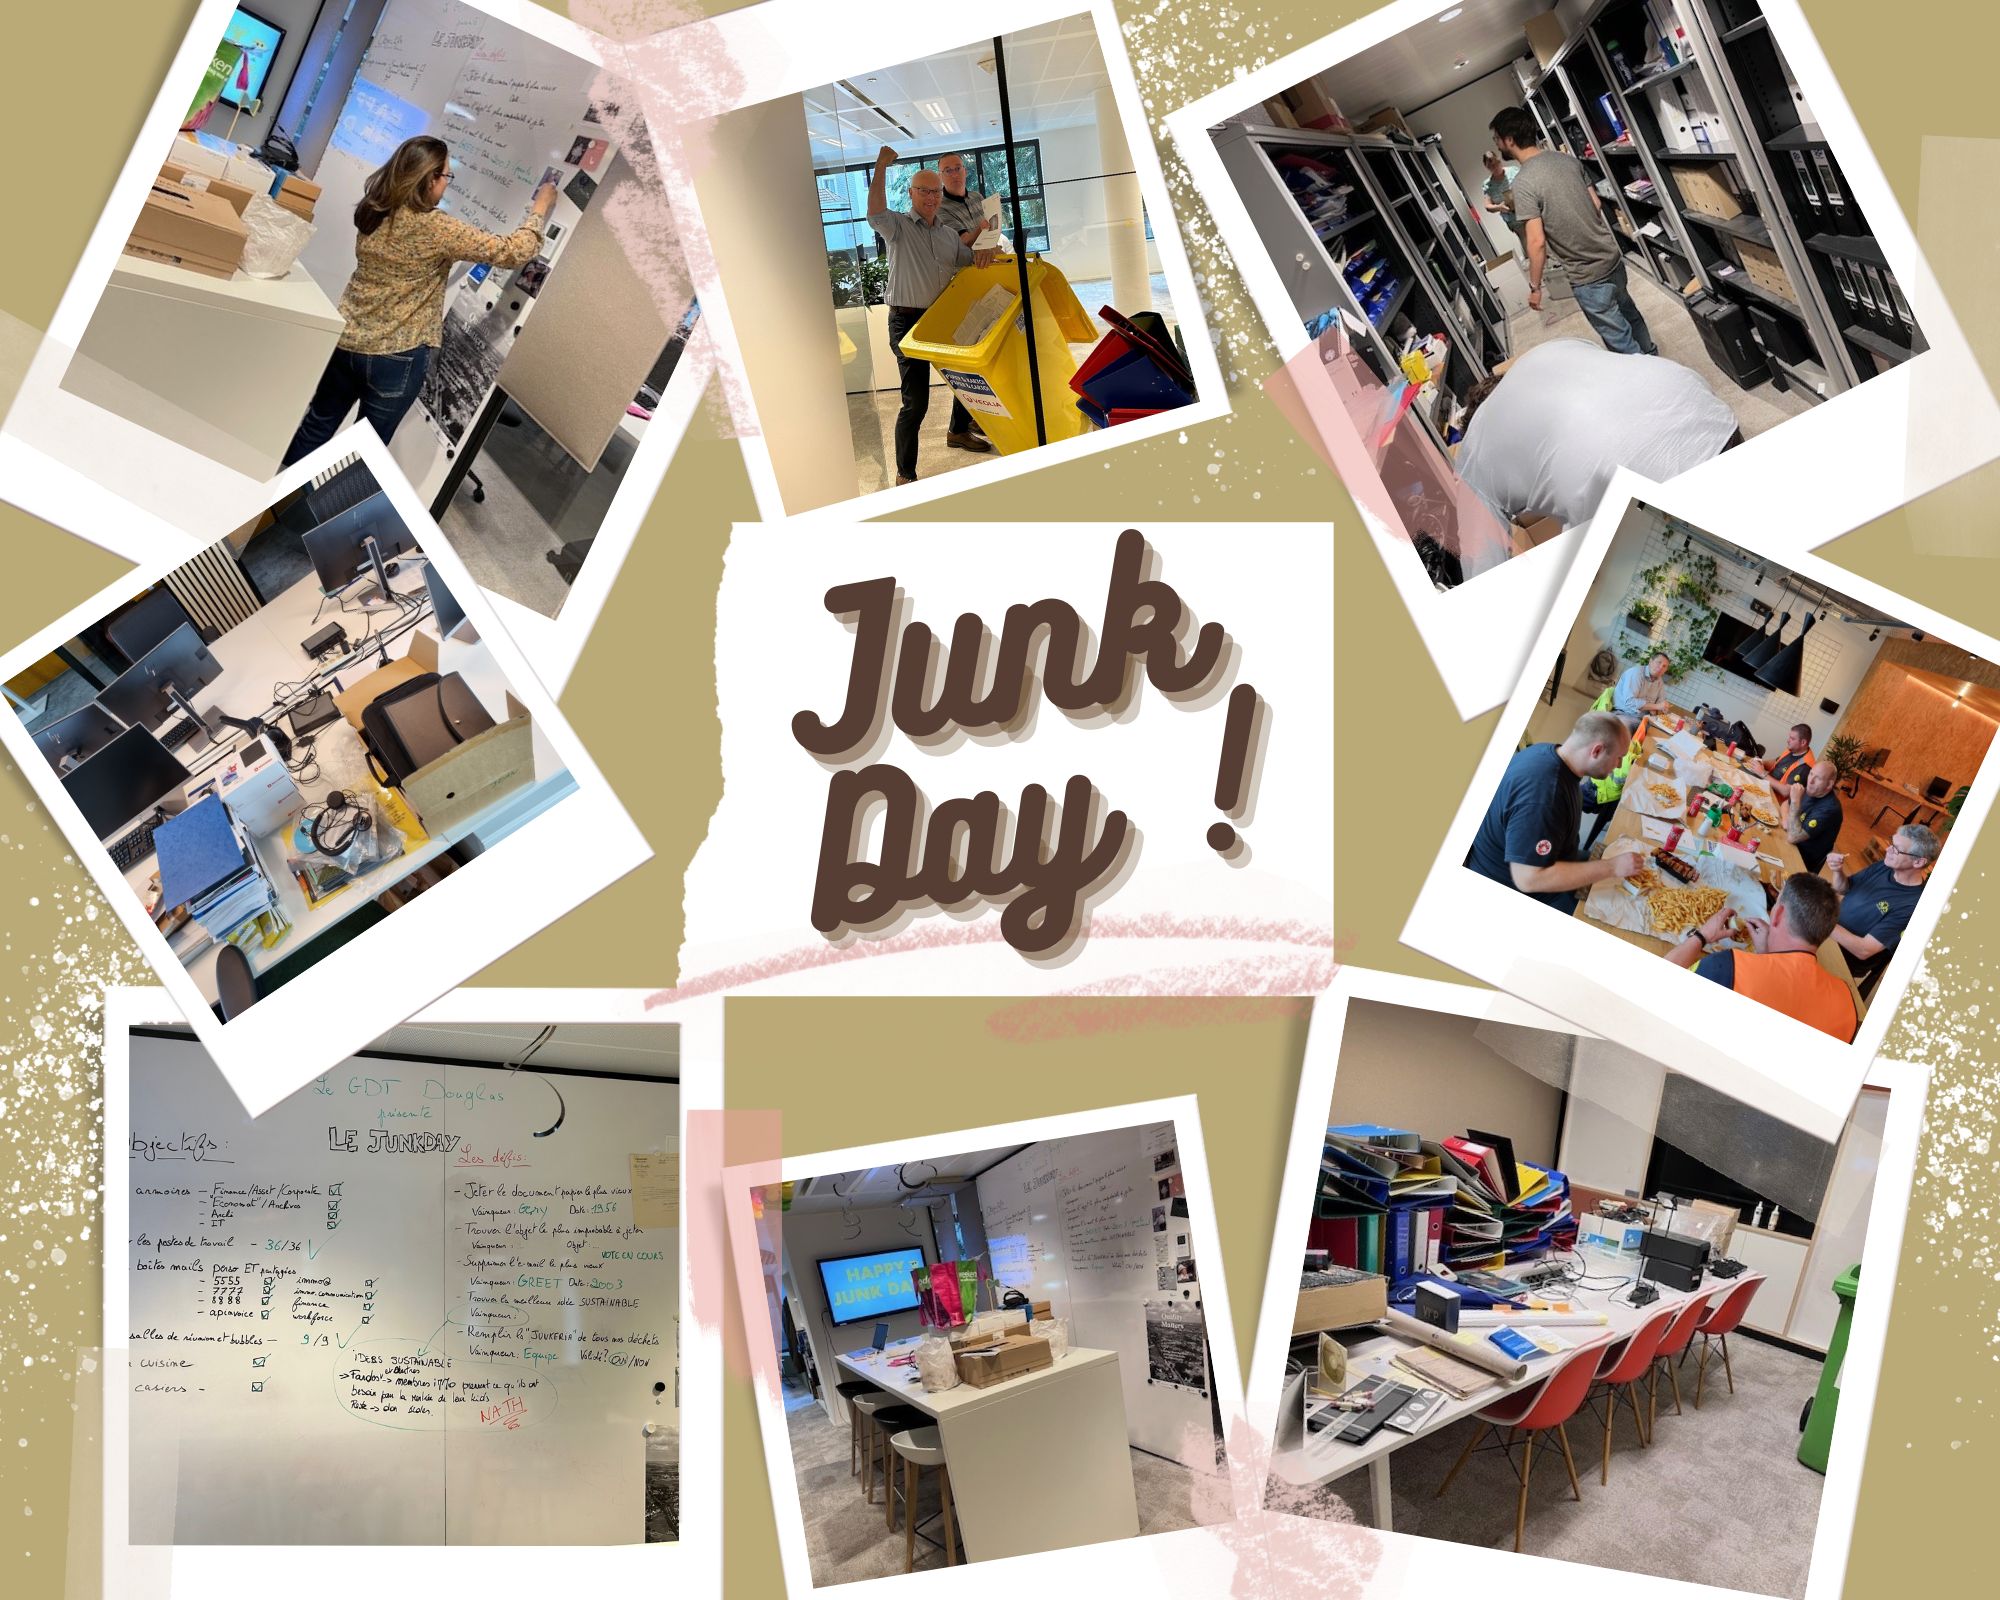 Junk day collage